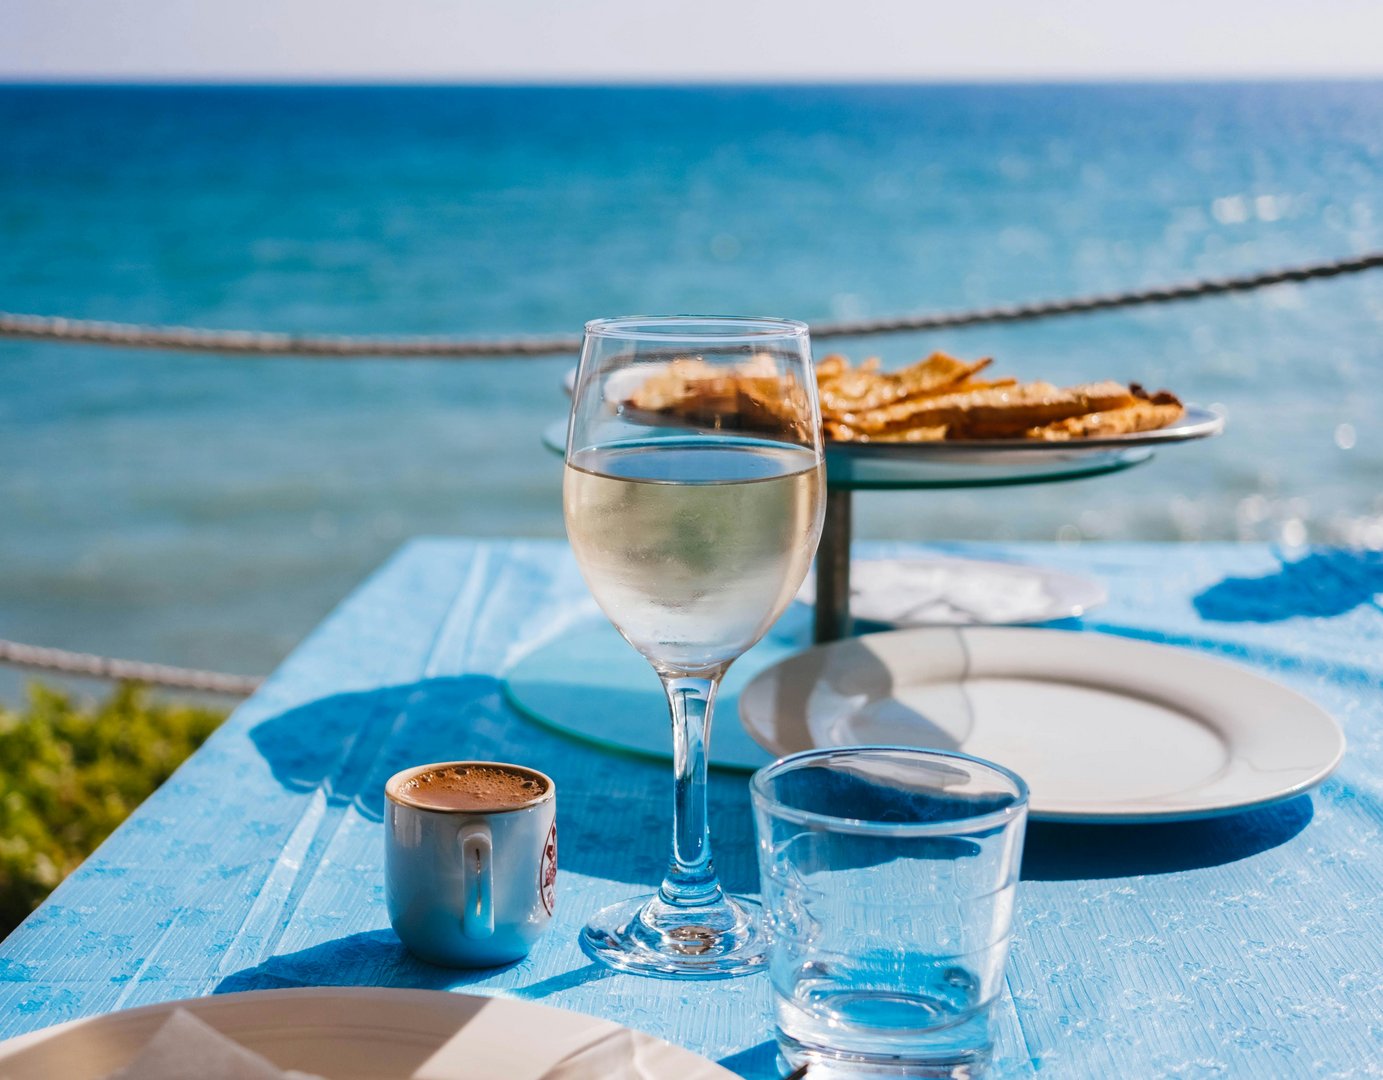 cover Cyprus restaurants packed during 3-day weekend — financial breather welcomed